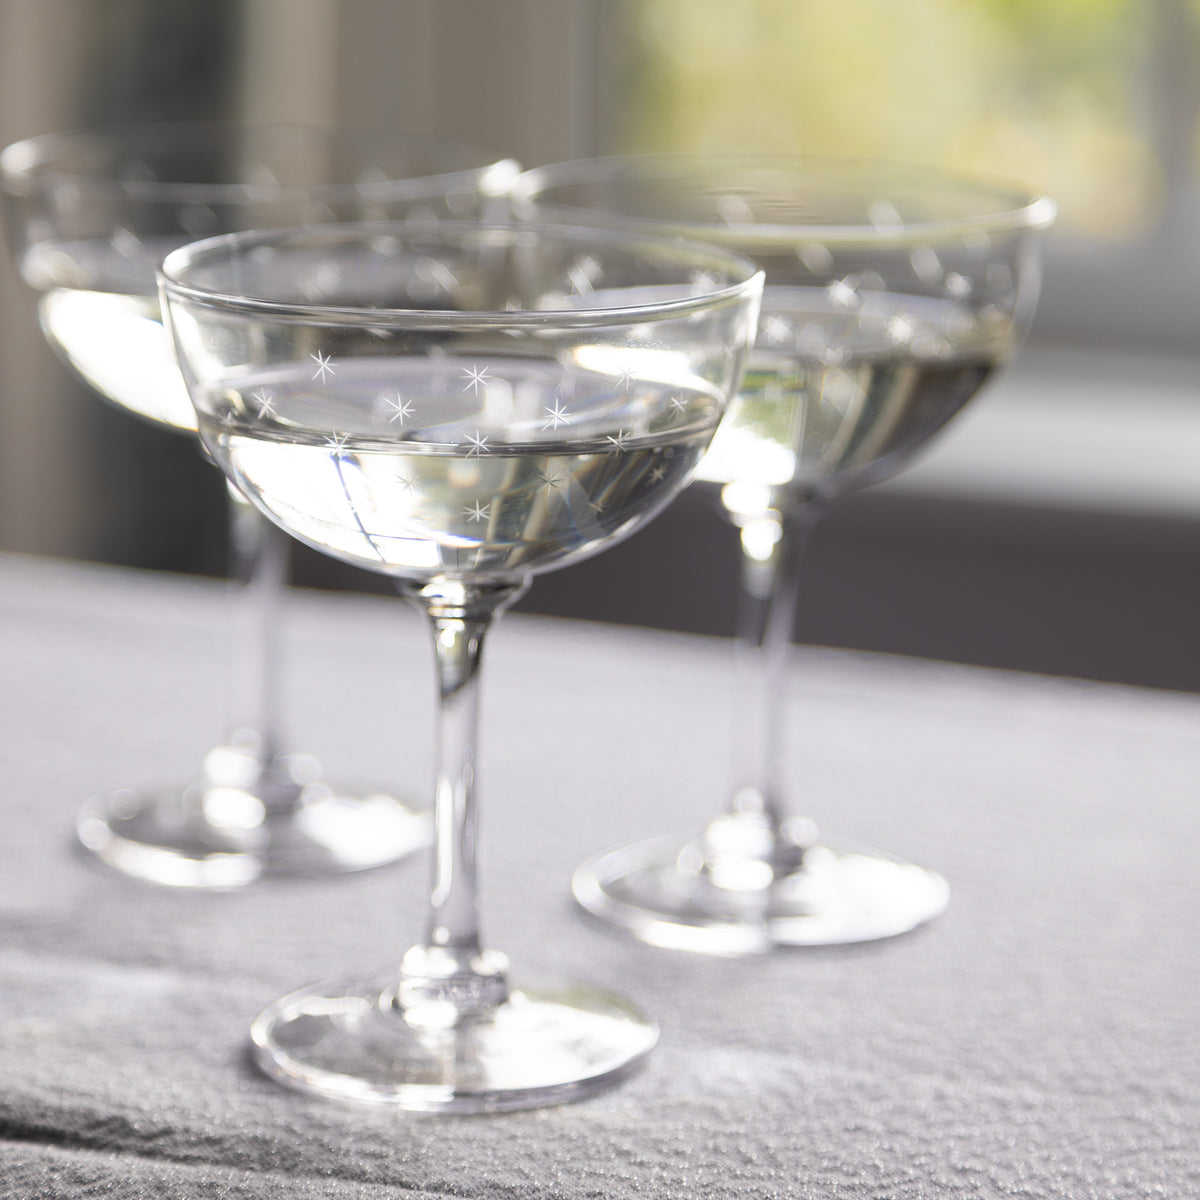 M&t Champagne Saucers with Stars Design (Set of 6)